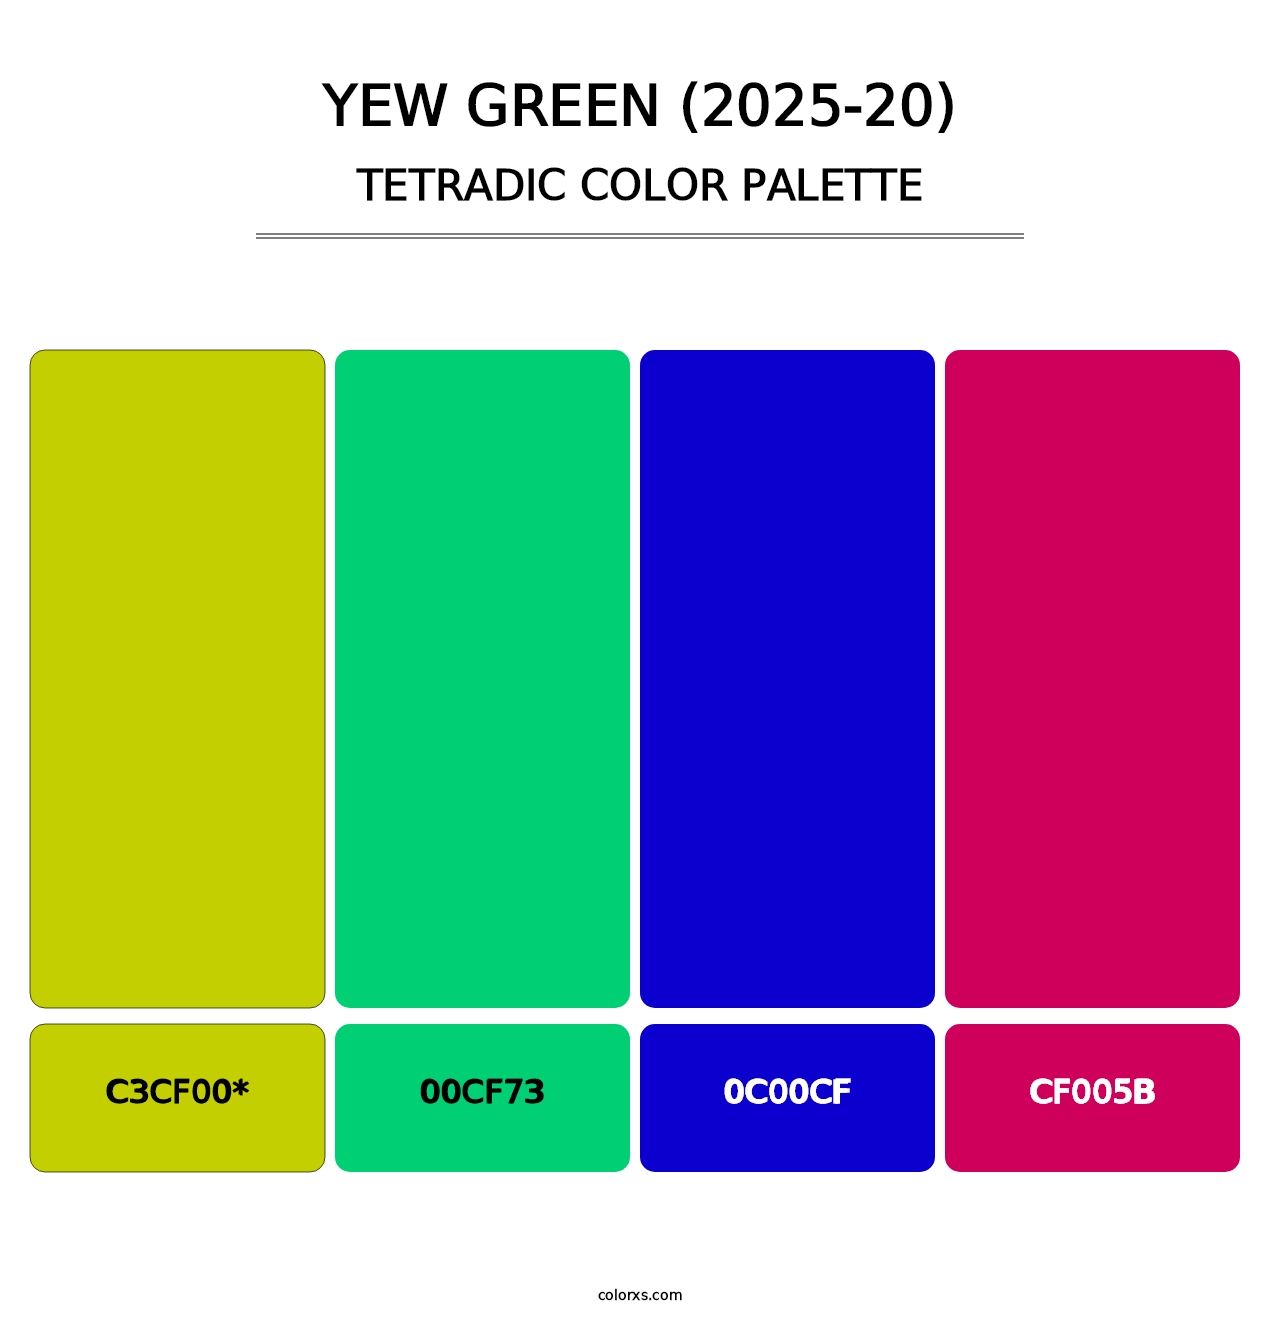 Yew Green (2025-20) - Tetradic Color Palette